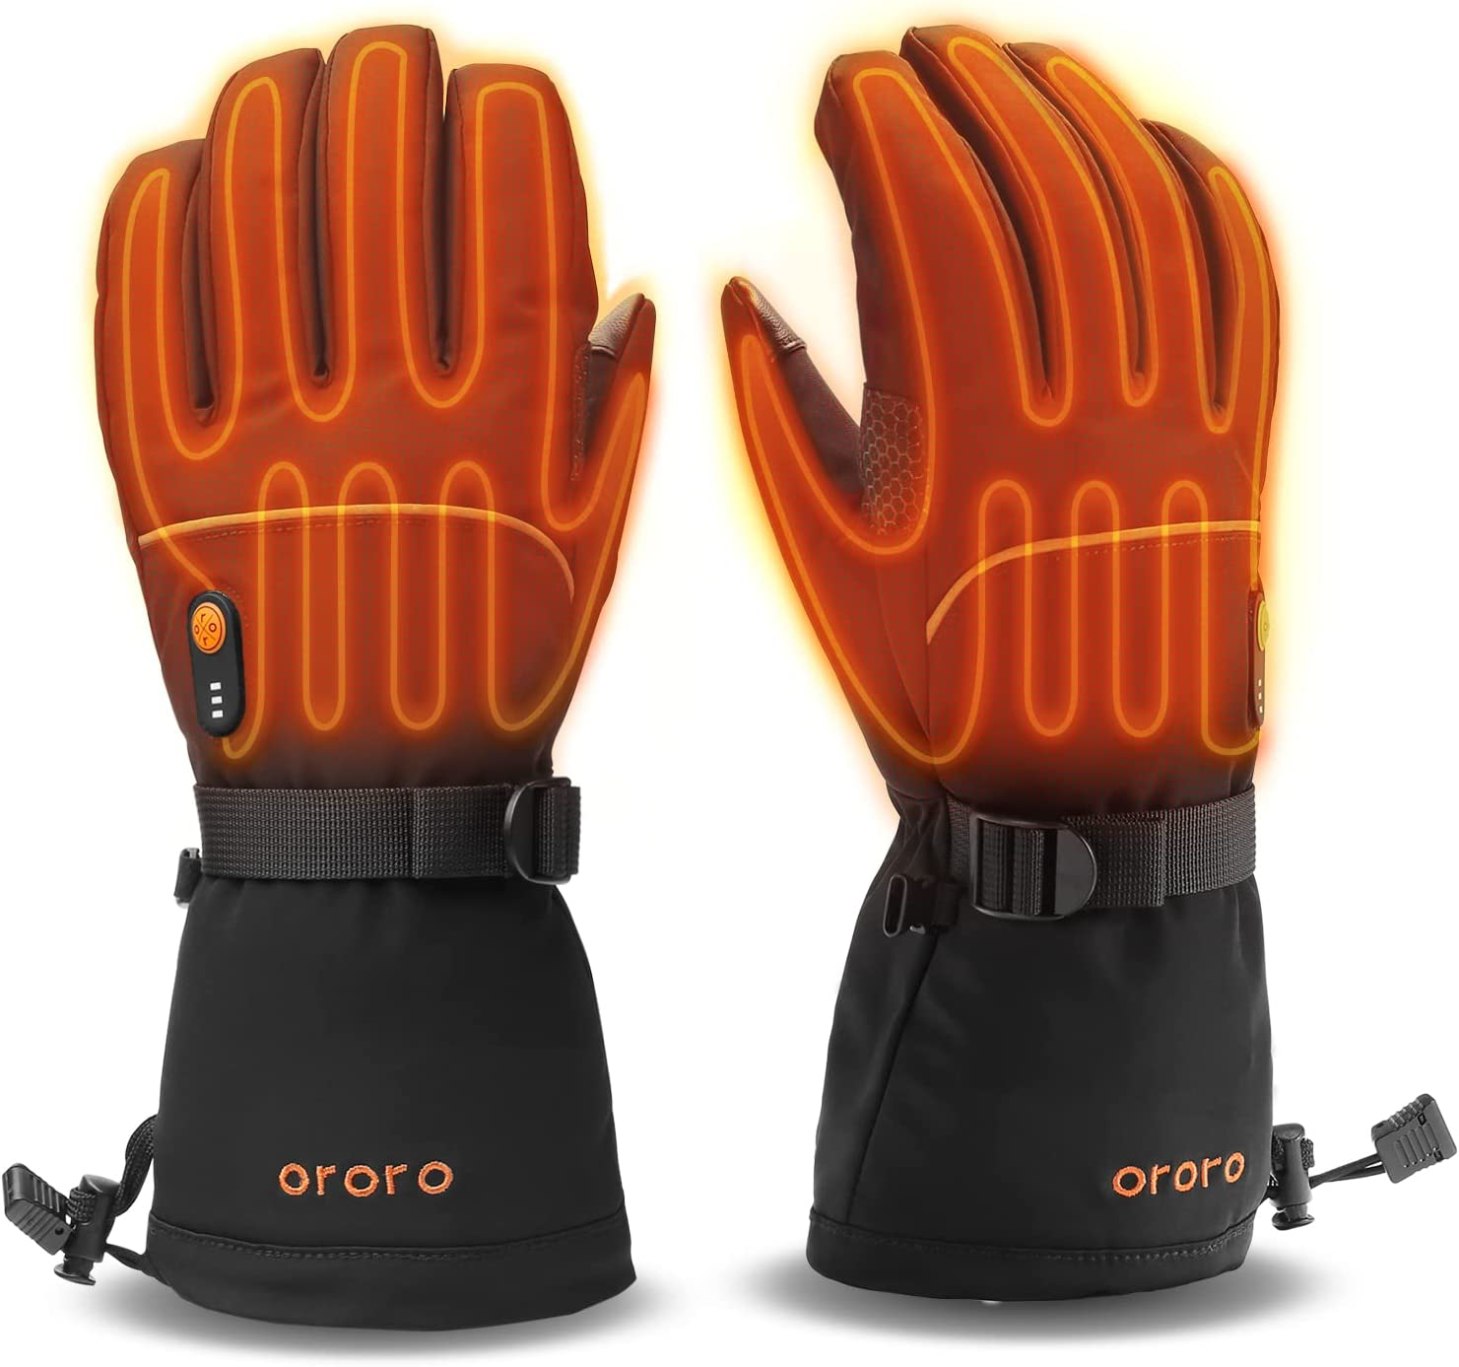 ActionHeat AA Battery Heated Snow Gloves for Men